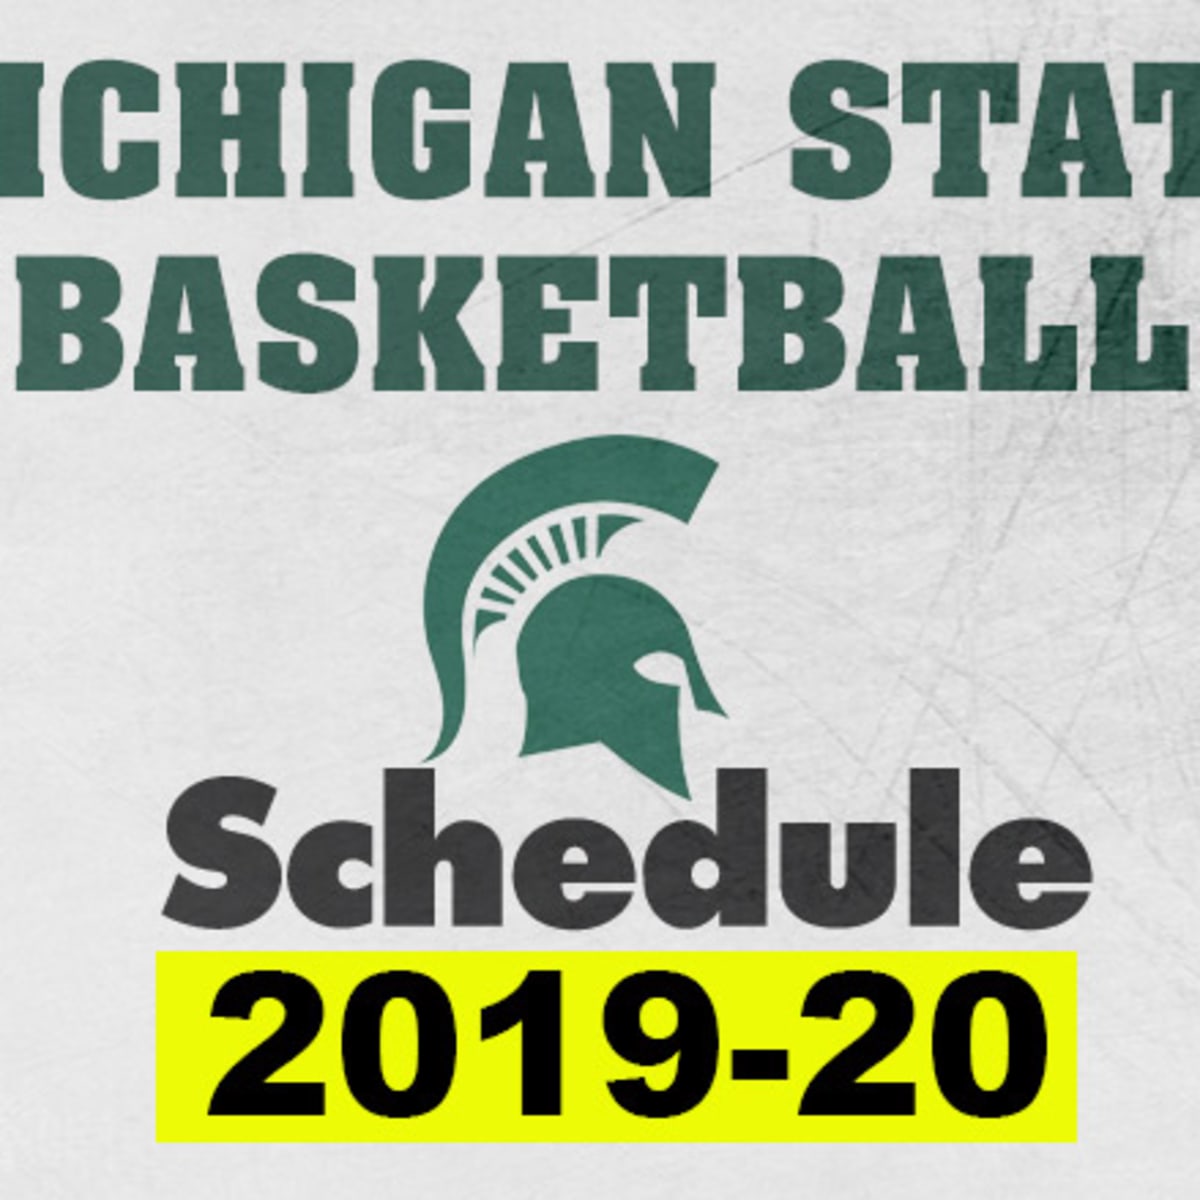 Michigan State Mens Basketball Schedule 2022 23 Michigan State Basketball Schedule 2019-20 - Athlonsports.com | Expert  Predictions, Picks, And Previews